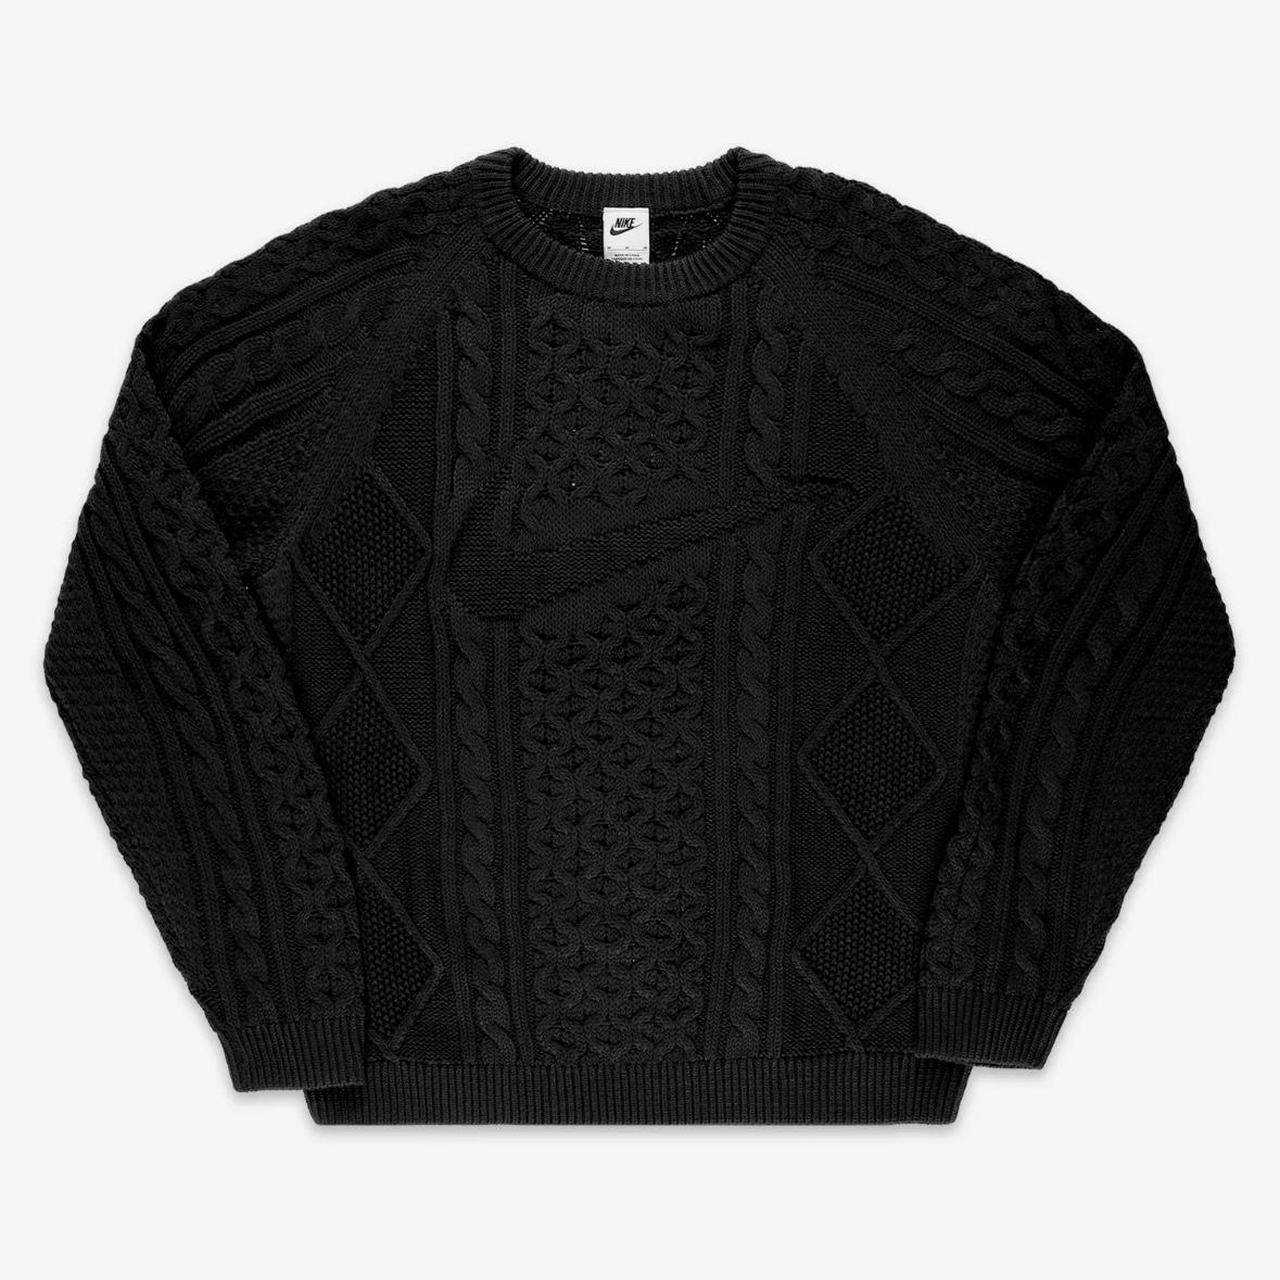 Nike Cable Knit jumper brand new with tags. Size... - Depop